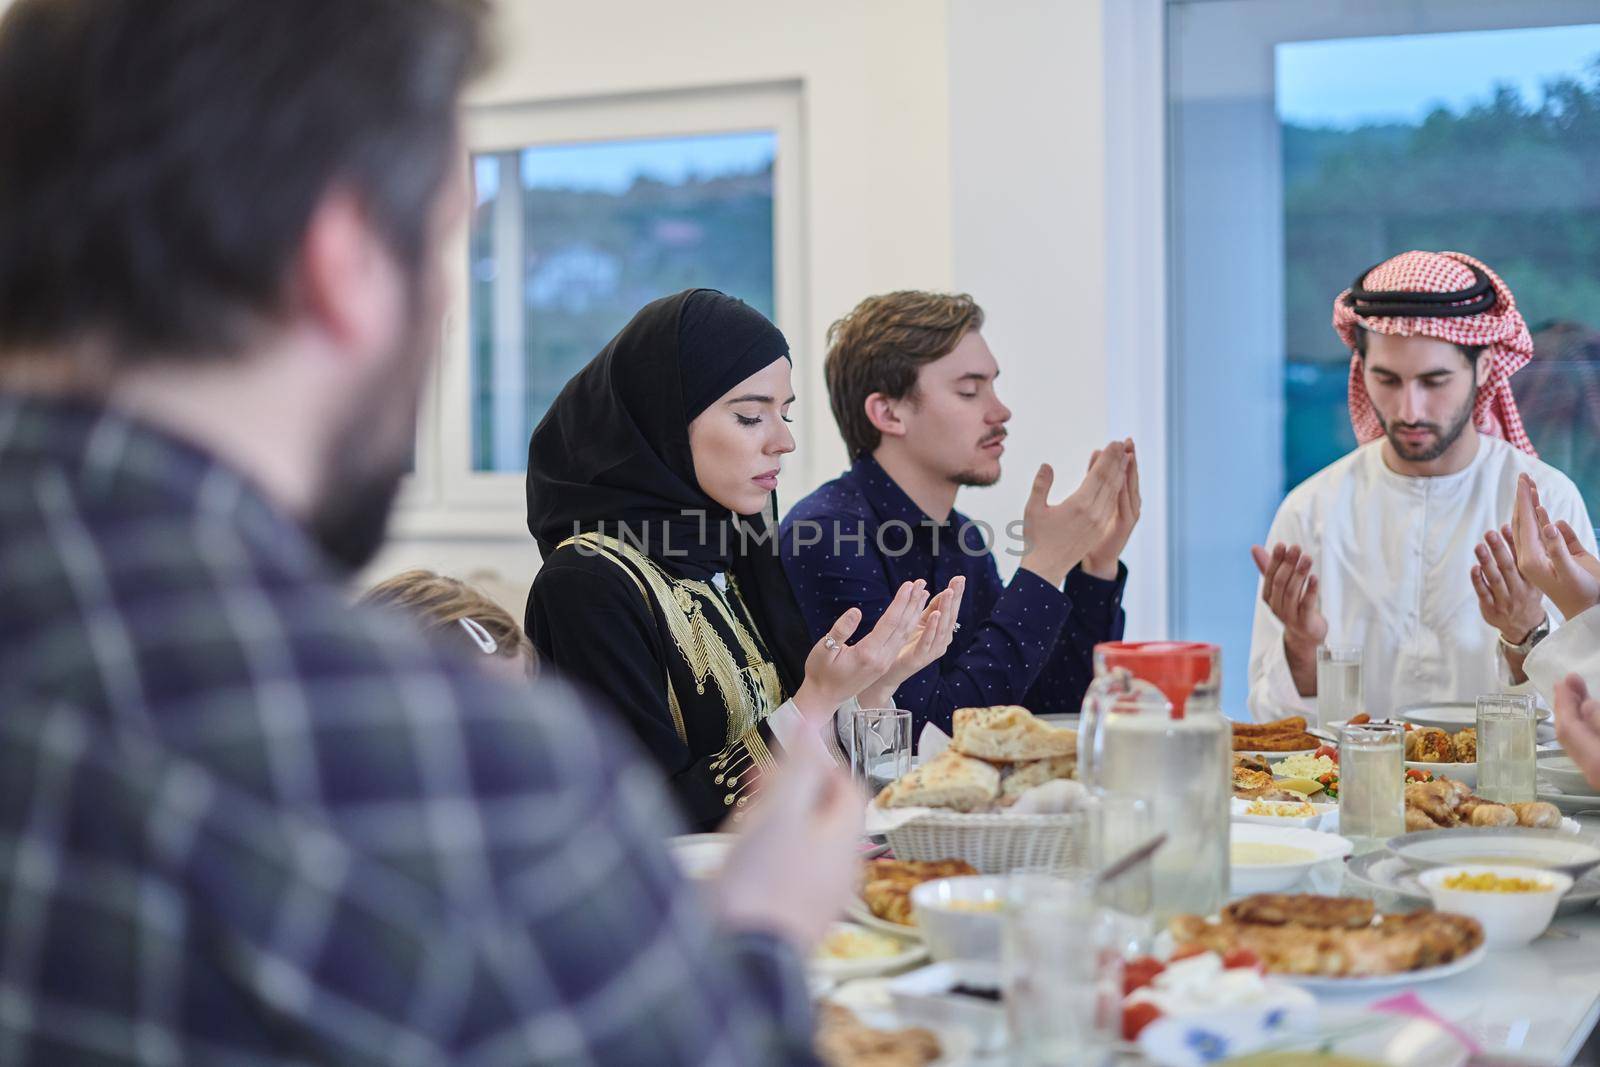 Muslim family making iftar dua to break fasting during Ramadan. Arabian people keeping hands in gesture for praying and thanking to Allah before traditional dinner